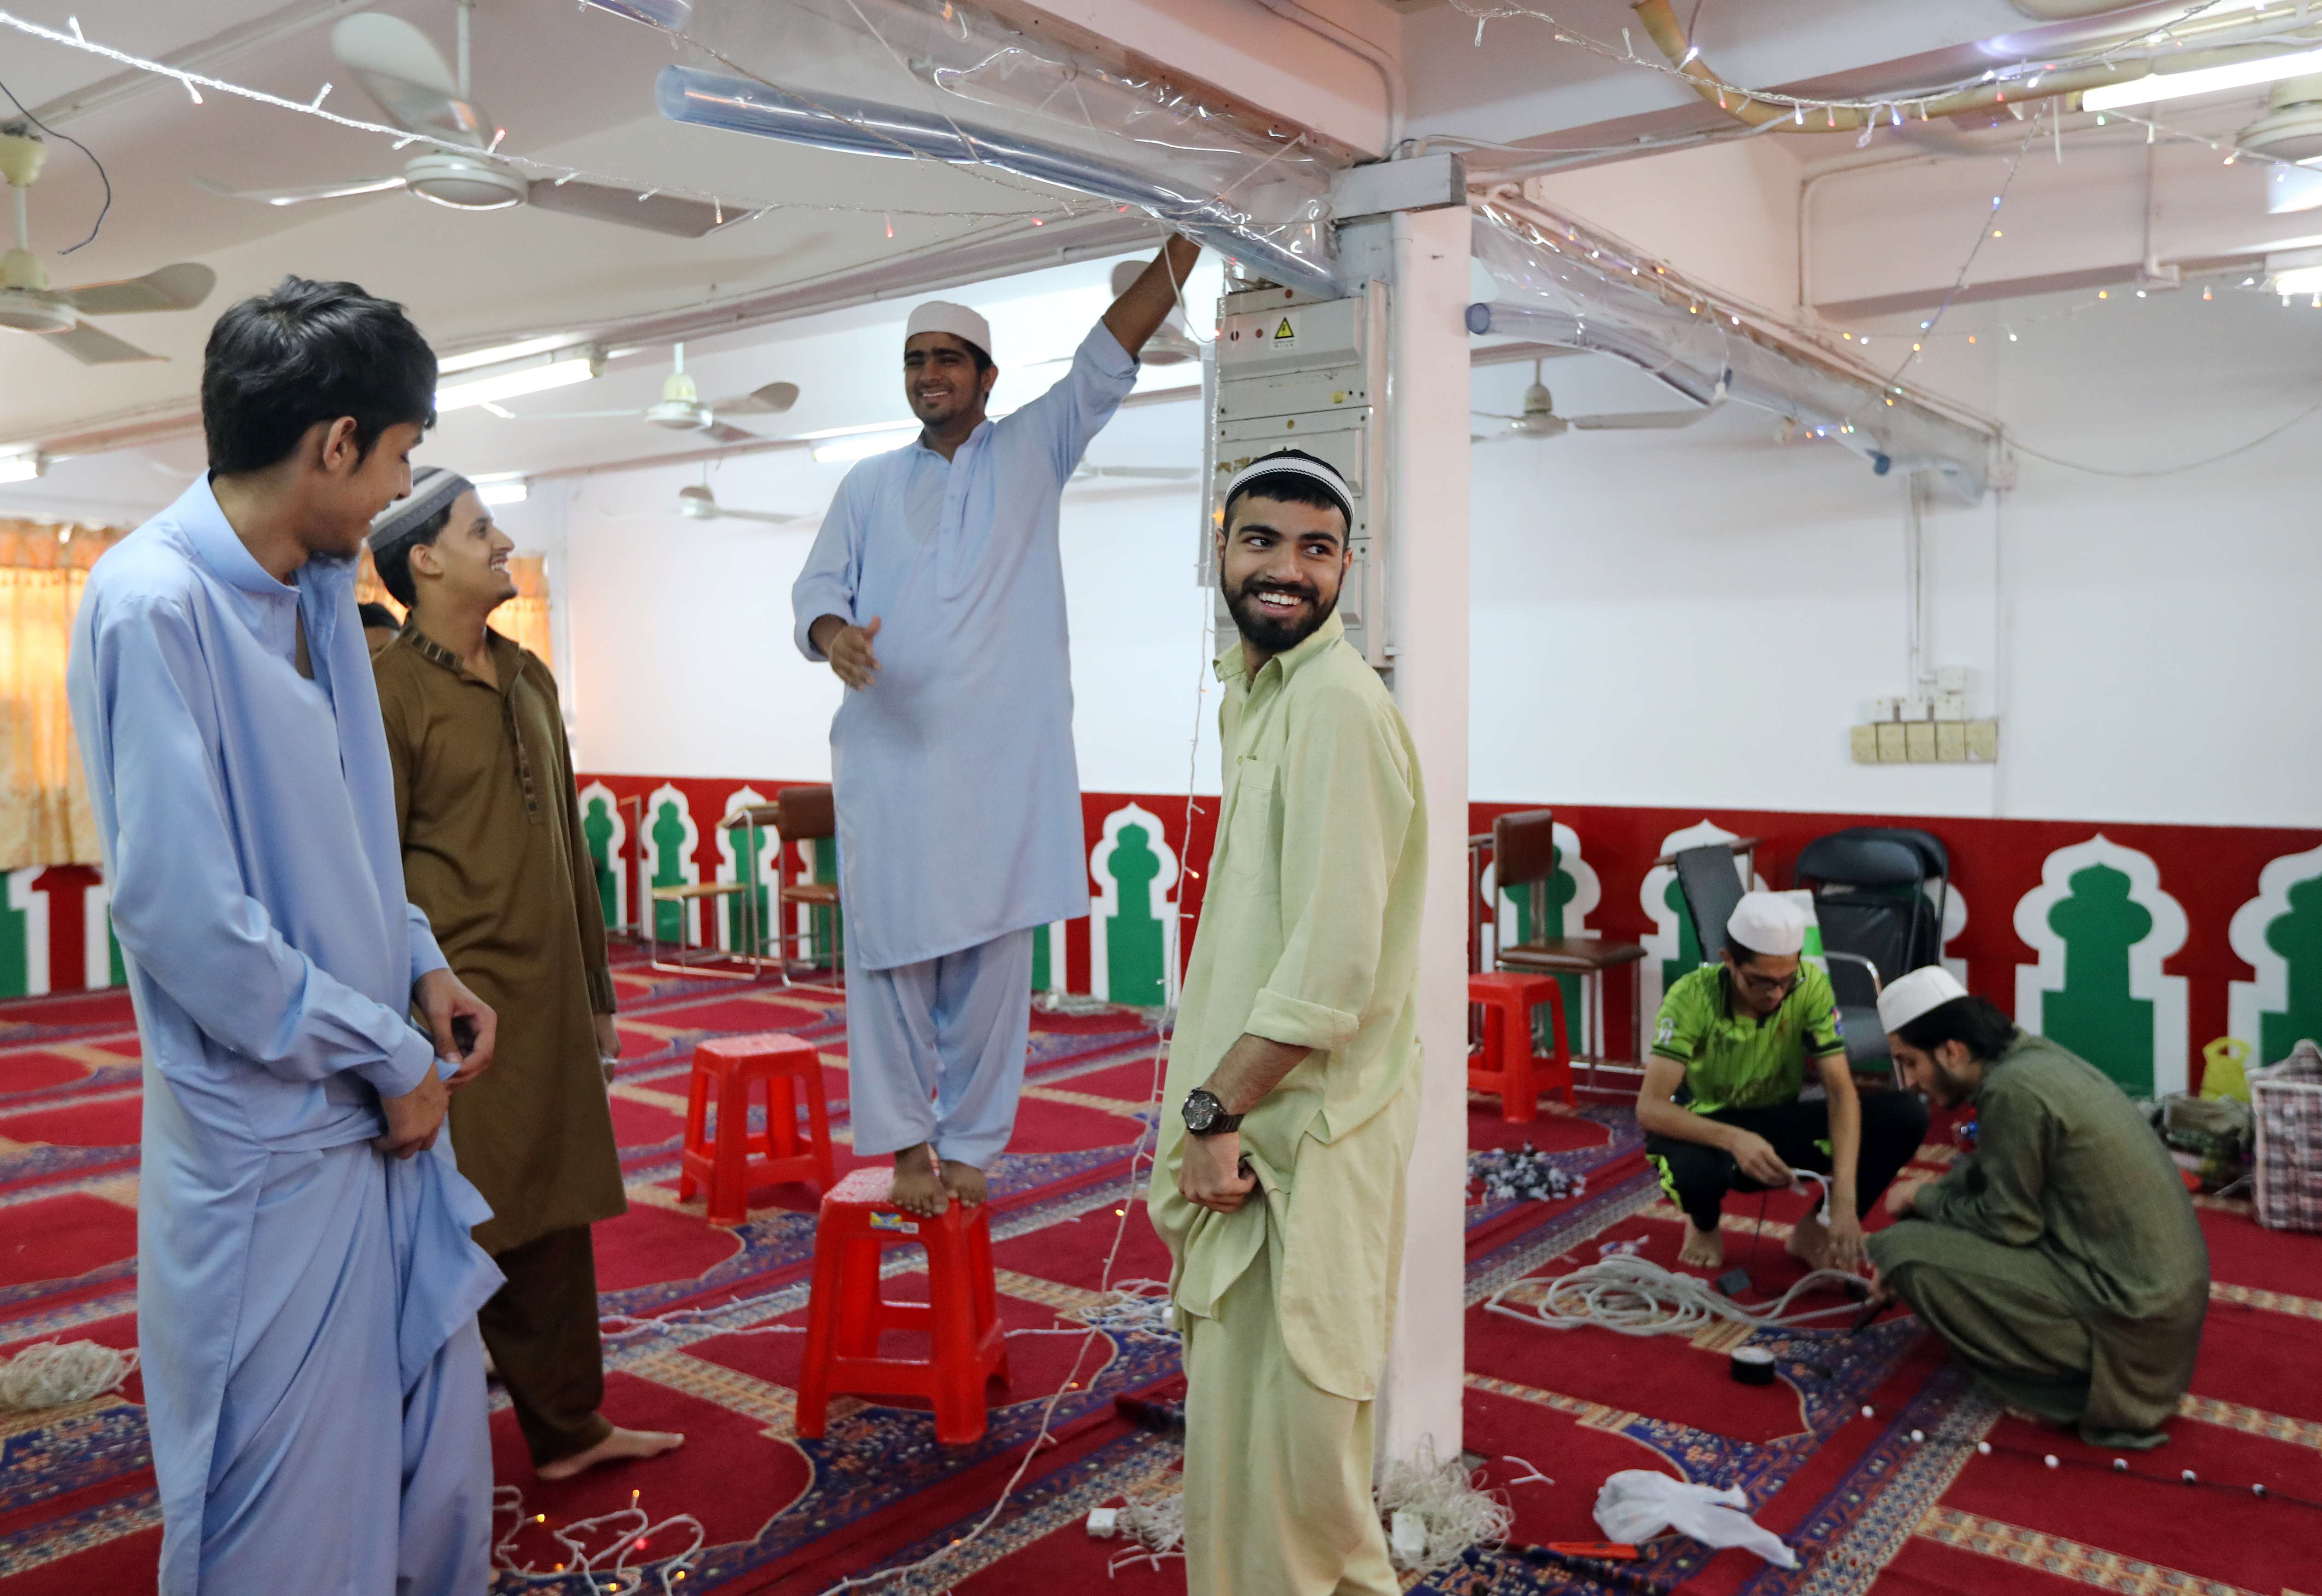 Muslims share a light moment as they decorate the Idara Minhaj-ul-Quran mosque in Kwai Chung in preparation for celebrations of the end of Ramadan. Photo: Bruce Yan